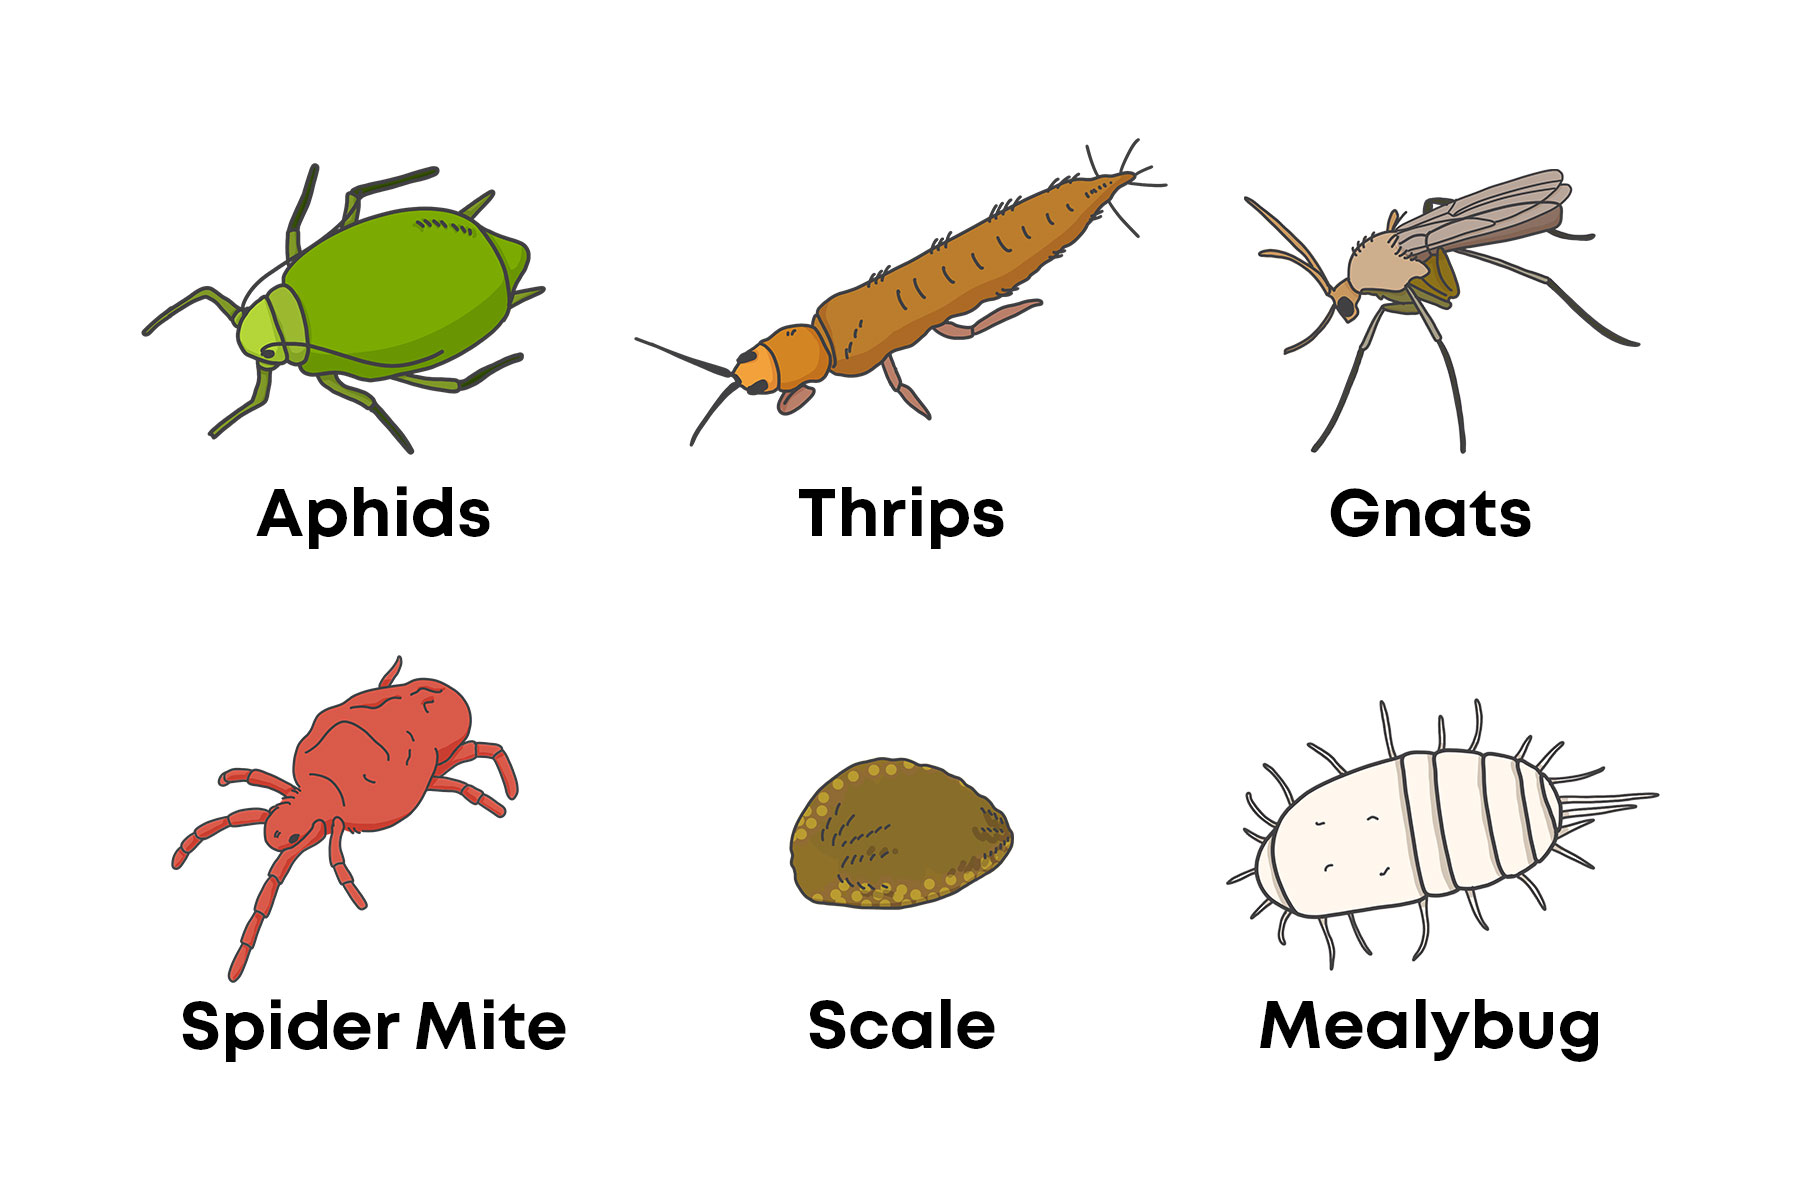 How to identify and get rid of thrips pests in your garden